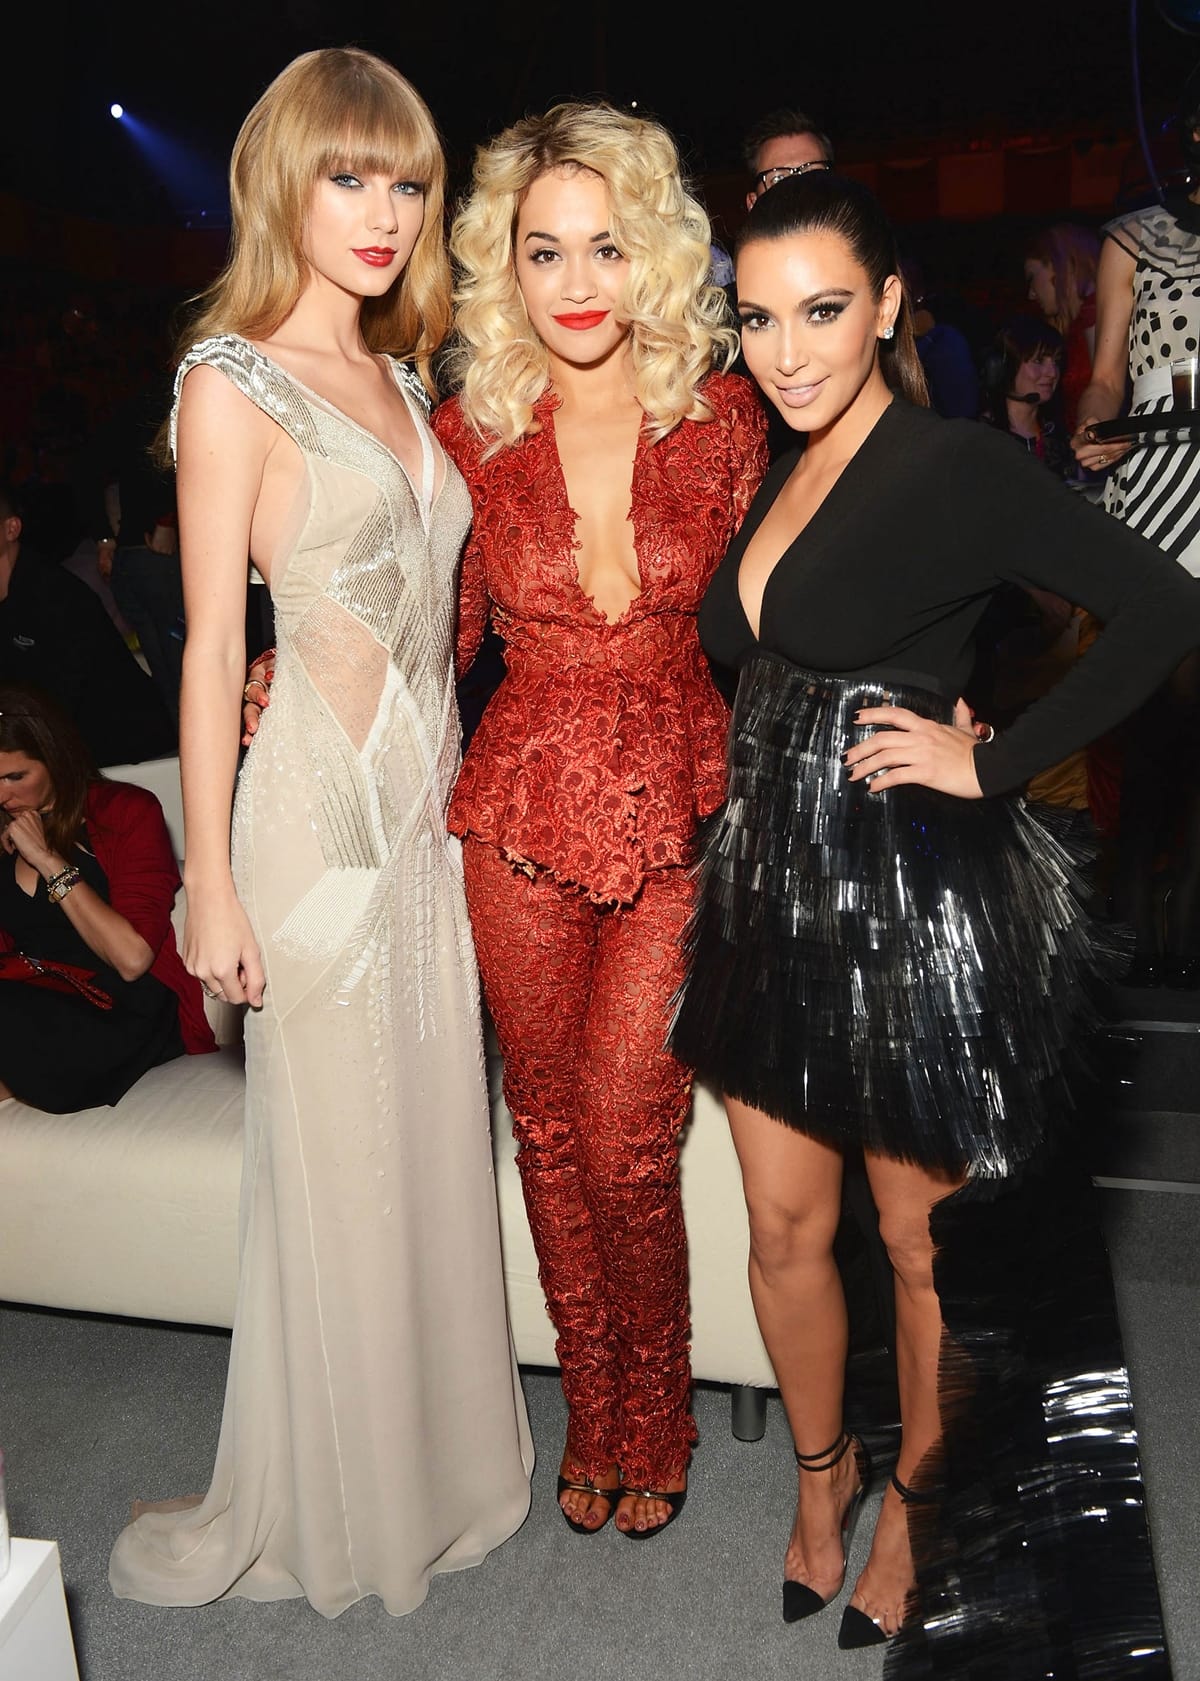 Taylor Swift is considerably taller than both Kim Kardashian, who is 5 feet 2 inches tall (157.5 cm), and Rita Ora, who stands at 5 feet 5.5 inches (166.4 cm)